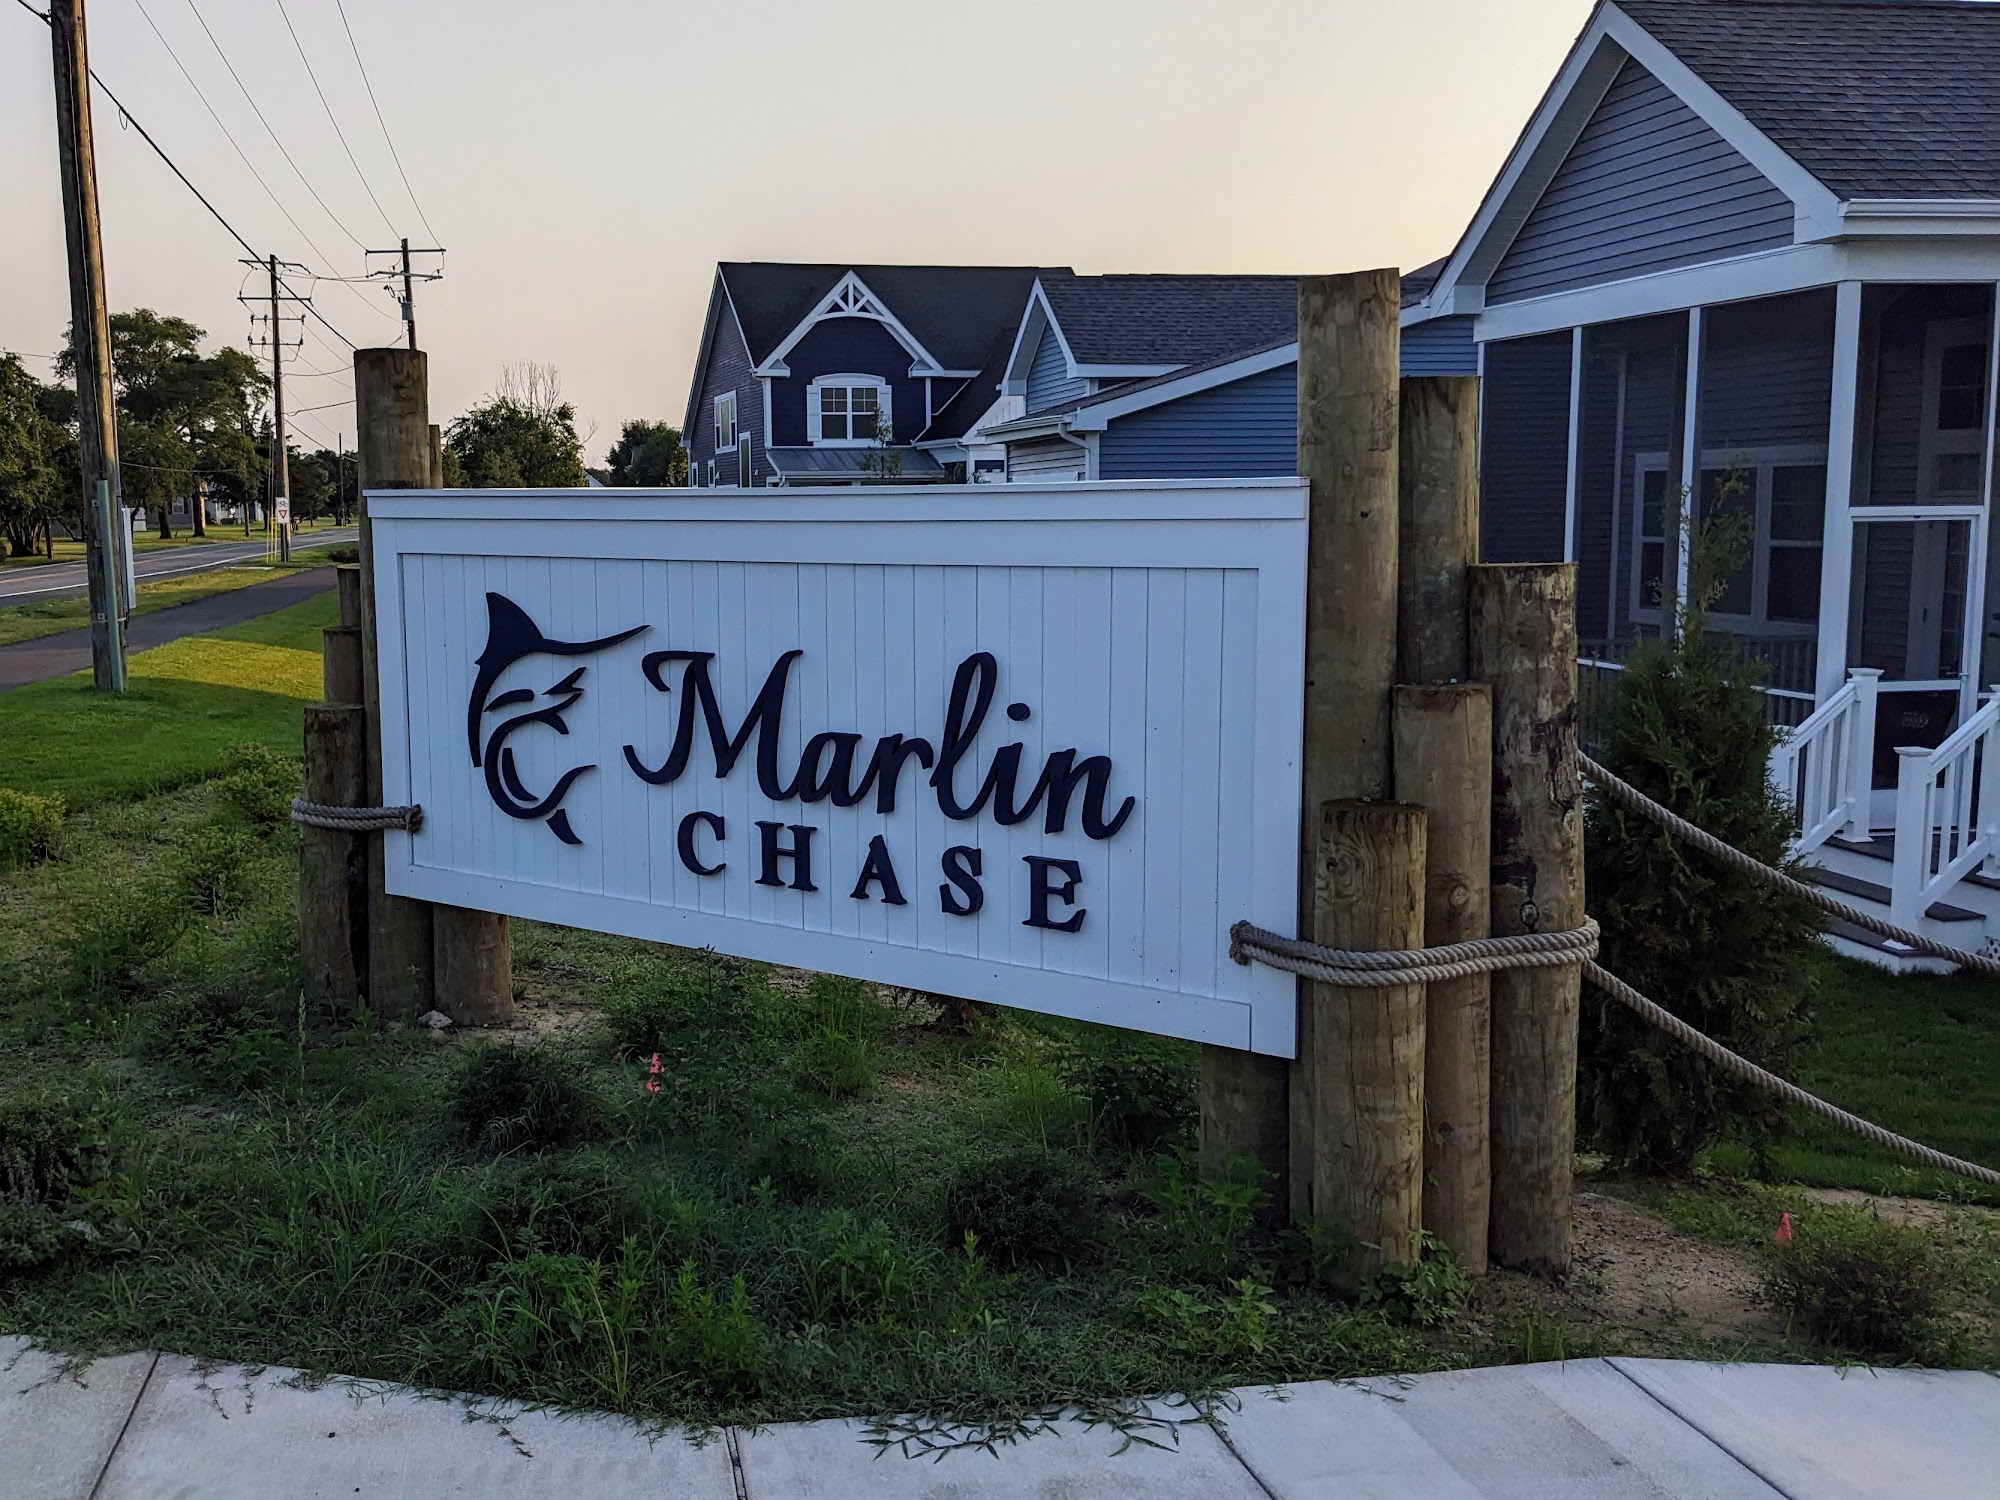 Schell Brothers at Marlin Chase 30576 Canary Way, Ocean View Delaware 19970